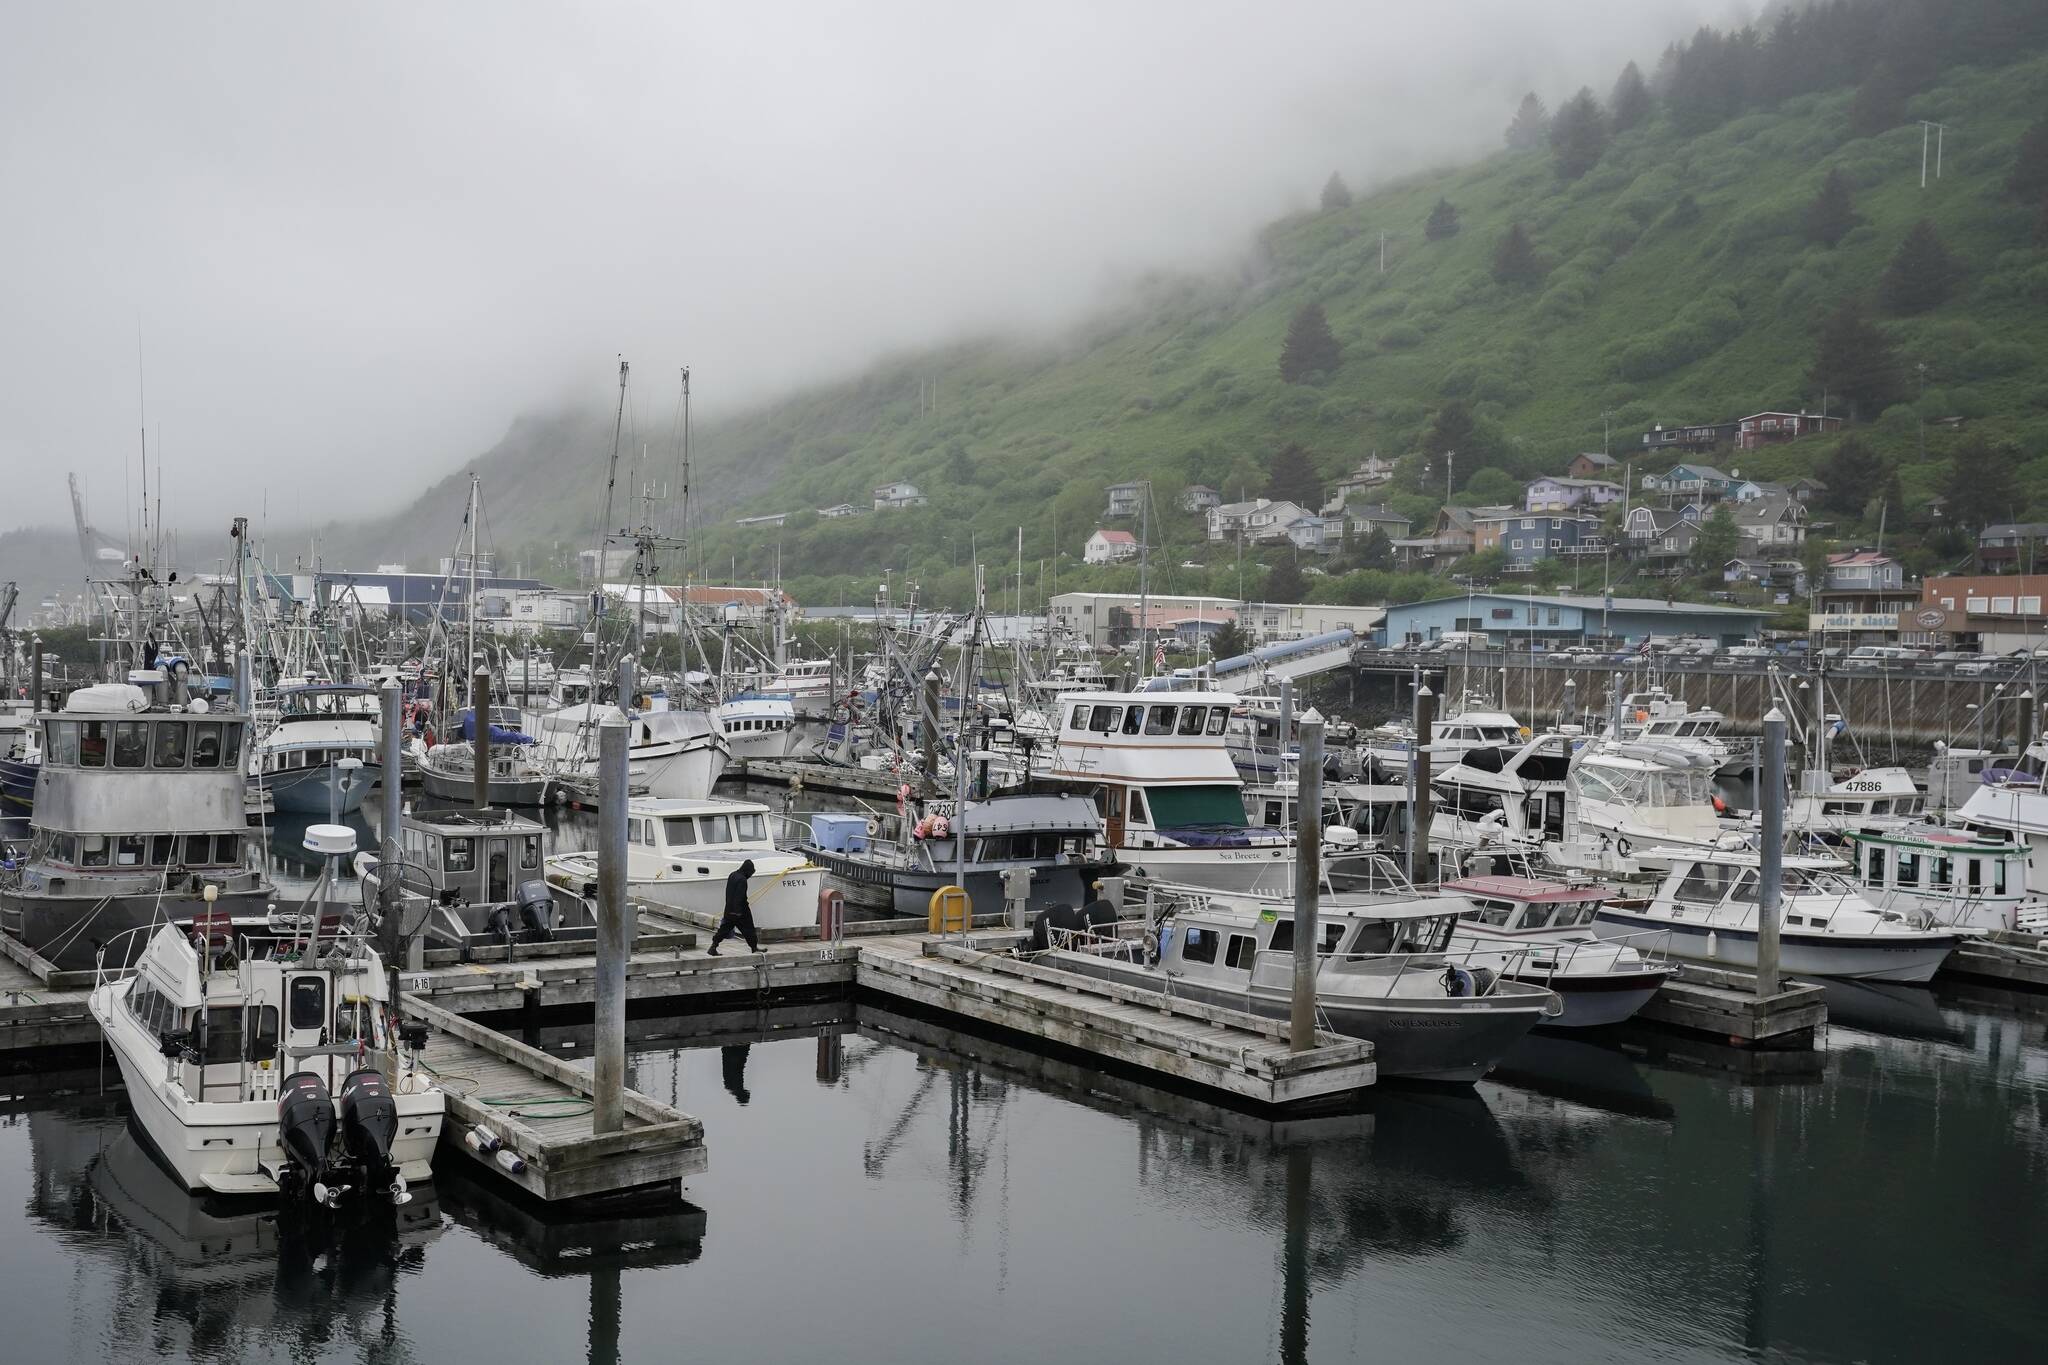 A person walks across the dock at St. Paul Harbor, Thursday, June 22, 2023, in Kodiak. Alaska fishermen will be able to harvest red king crab, the largest and most lucrative of all the Bering Sea crab species, for the first time in two years, offering a slight reprieve to the beleaguered fishery beset by low numbers likely exacerbated by climate change. (AP Photo/Joshua A. Bickel, File)